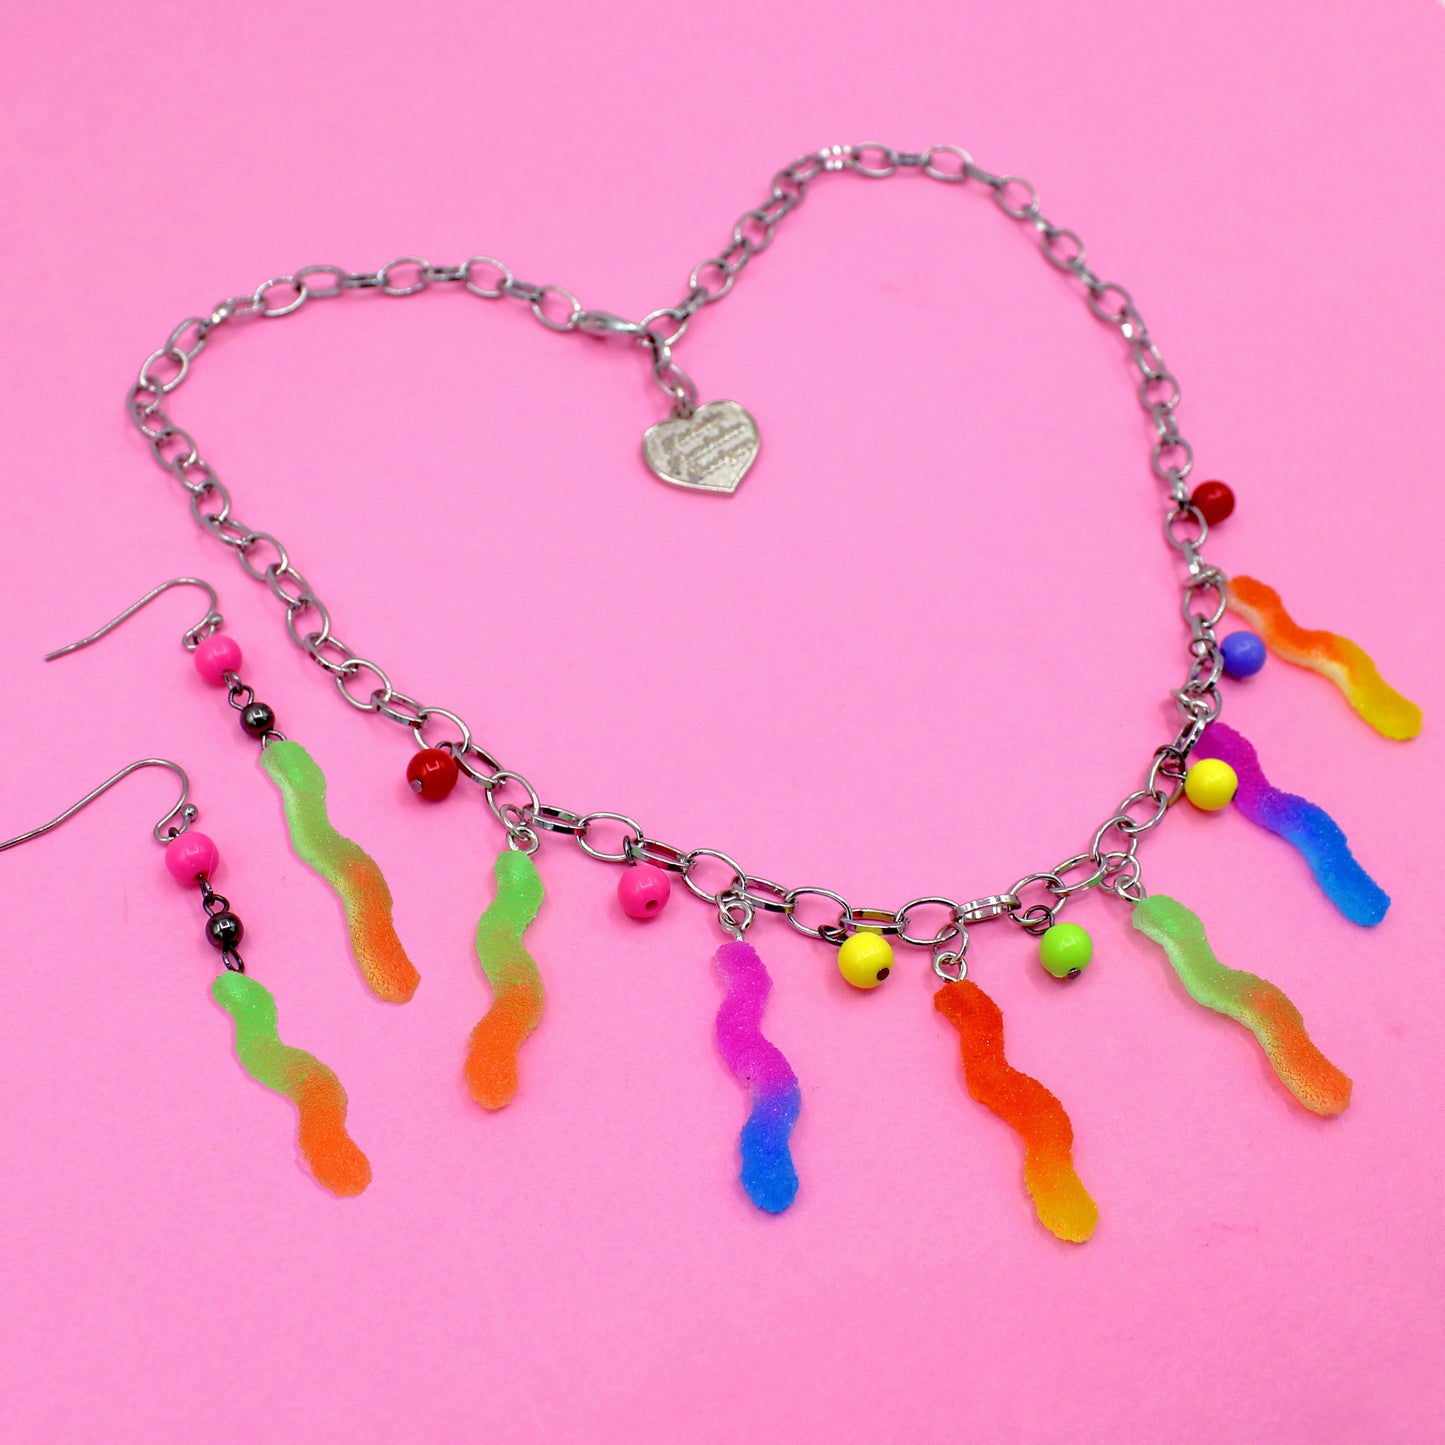 Sour Gummy Worm Charm Necklace and Earrings Handmade Cute Candy Jewelry Gift Resin for Women